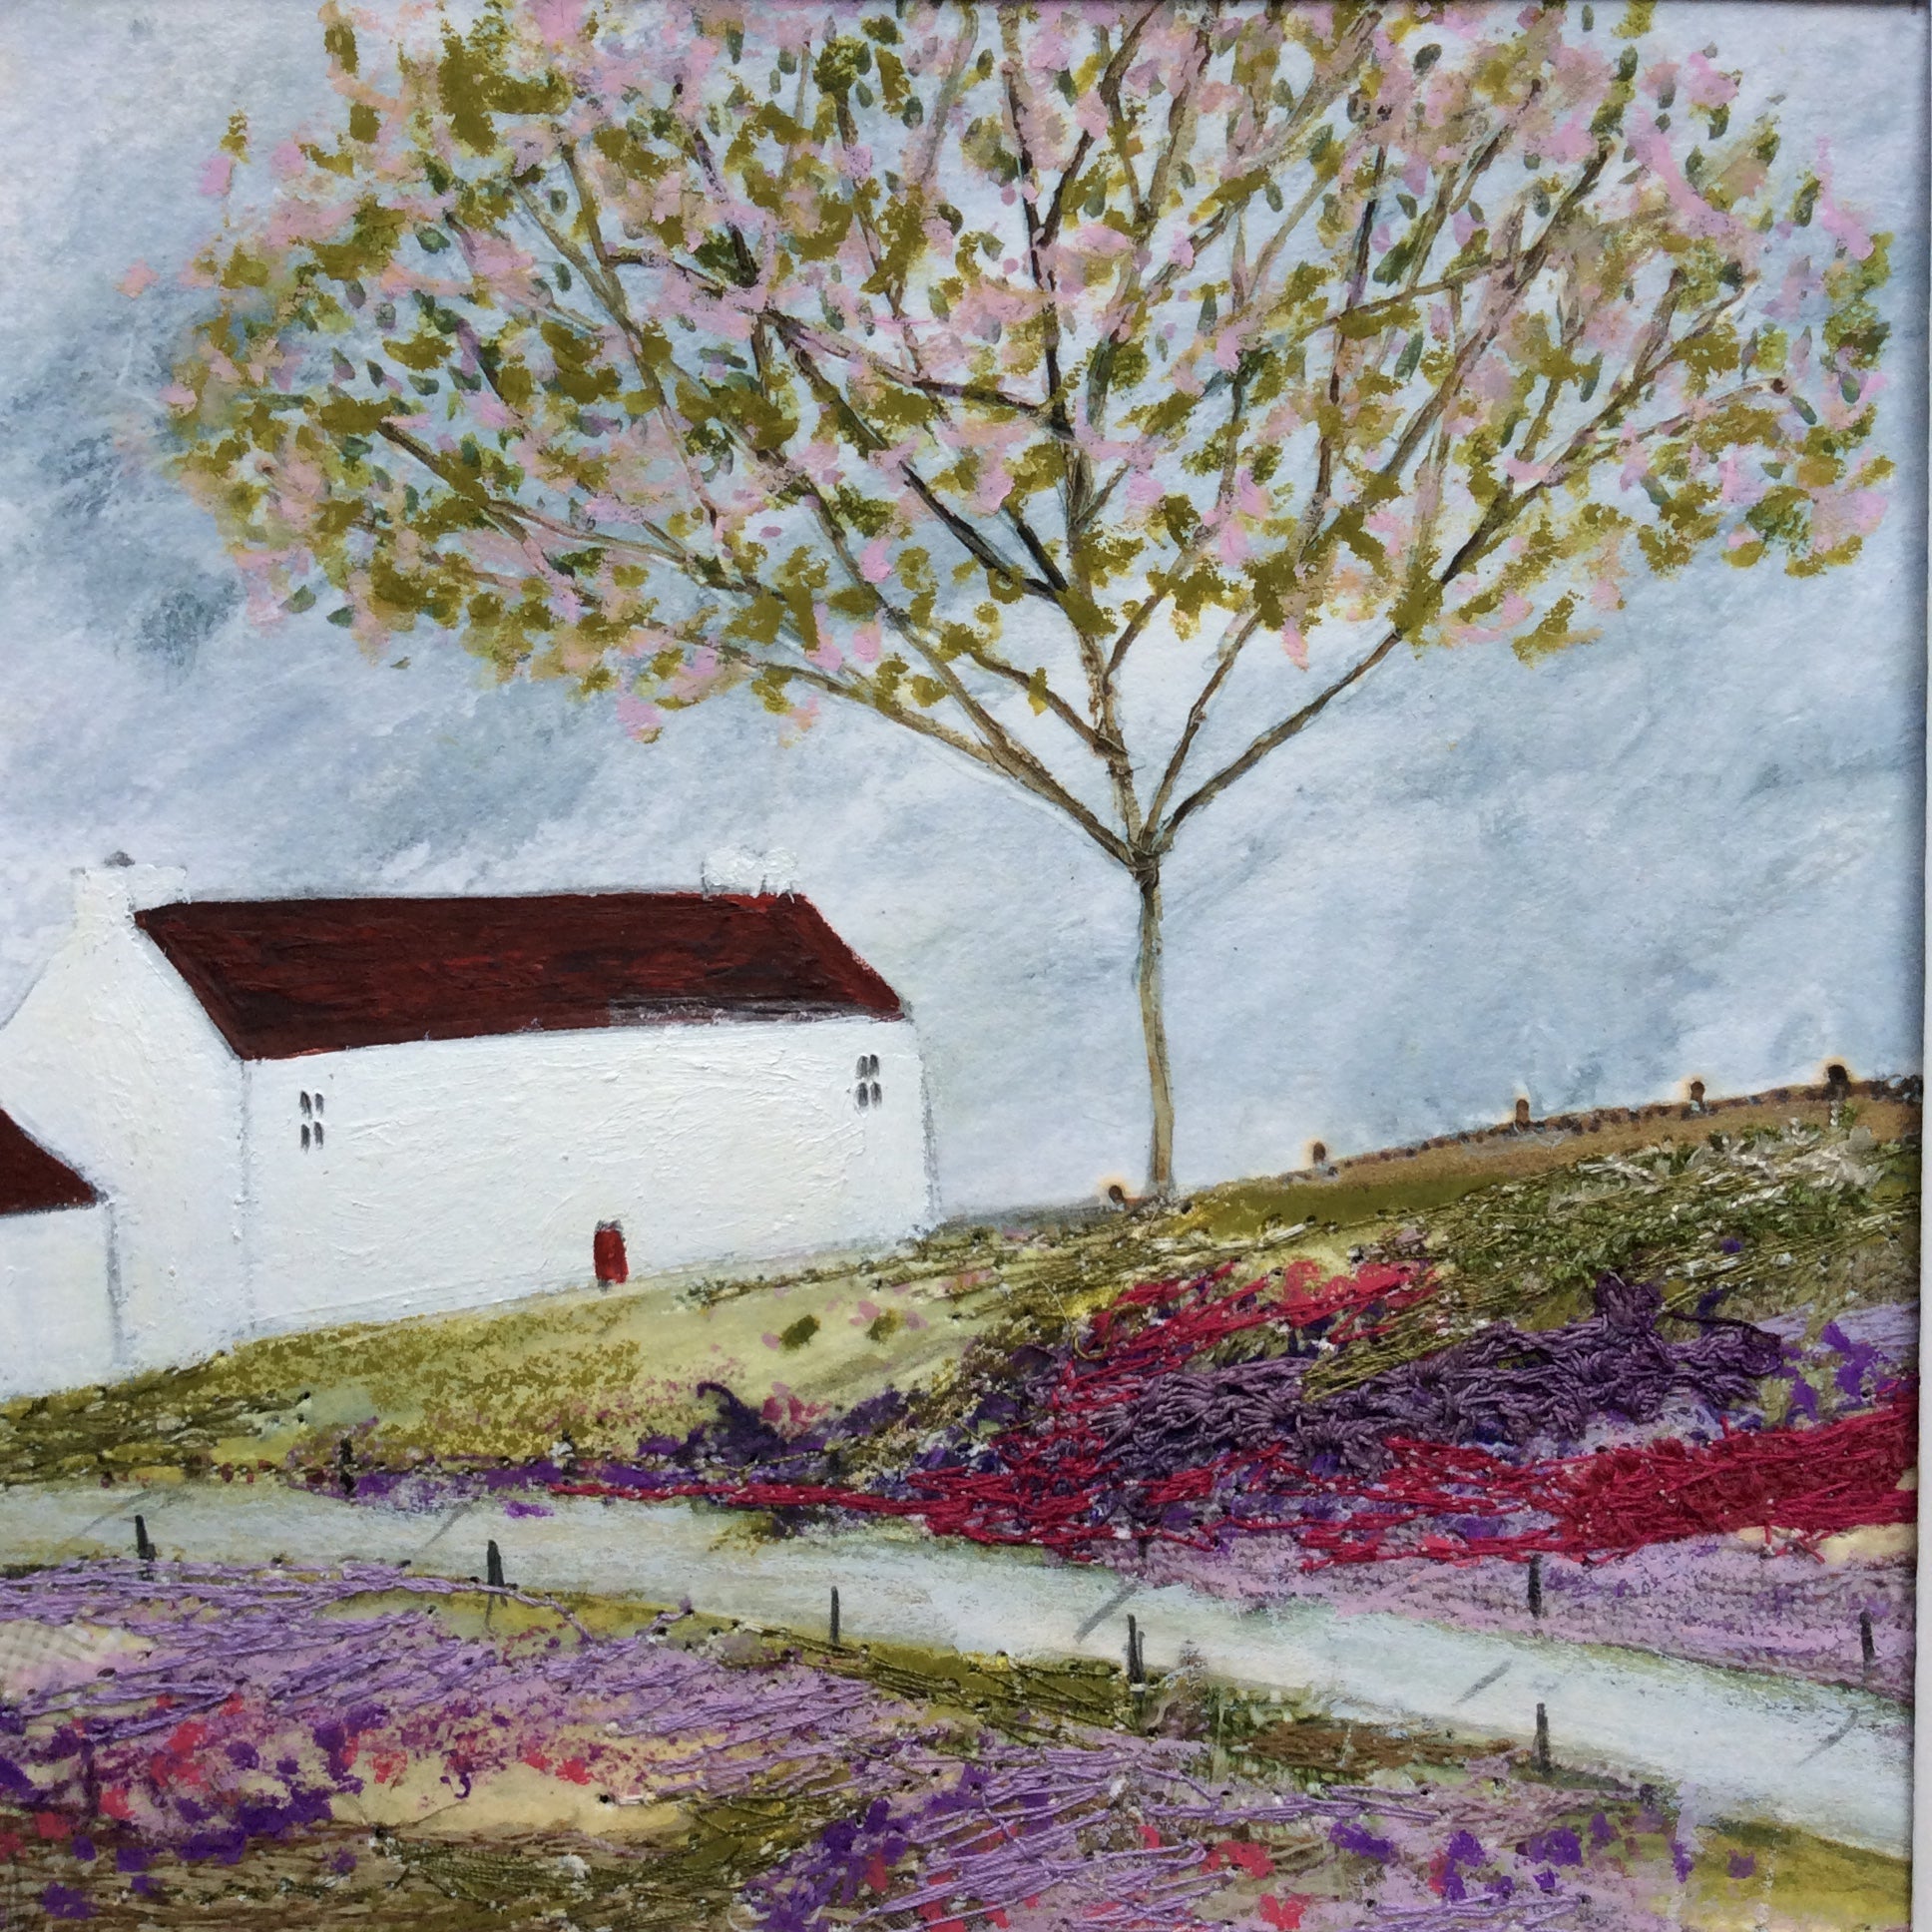 Mixed Media Art print work by Louise O'Hara "A rather large cherry blossom”